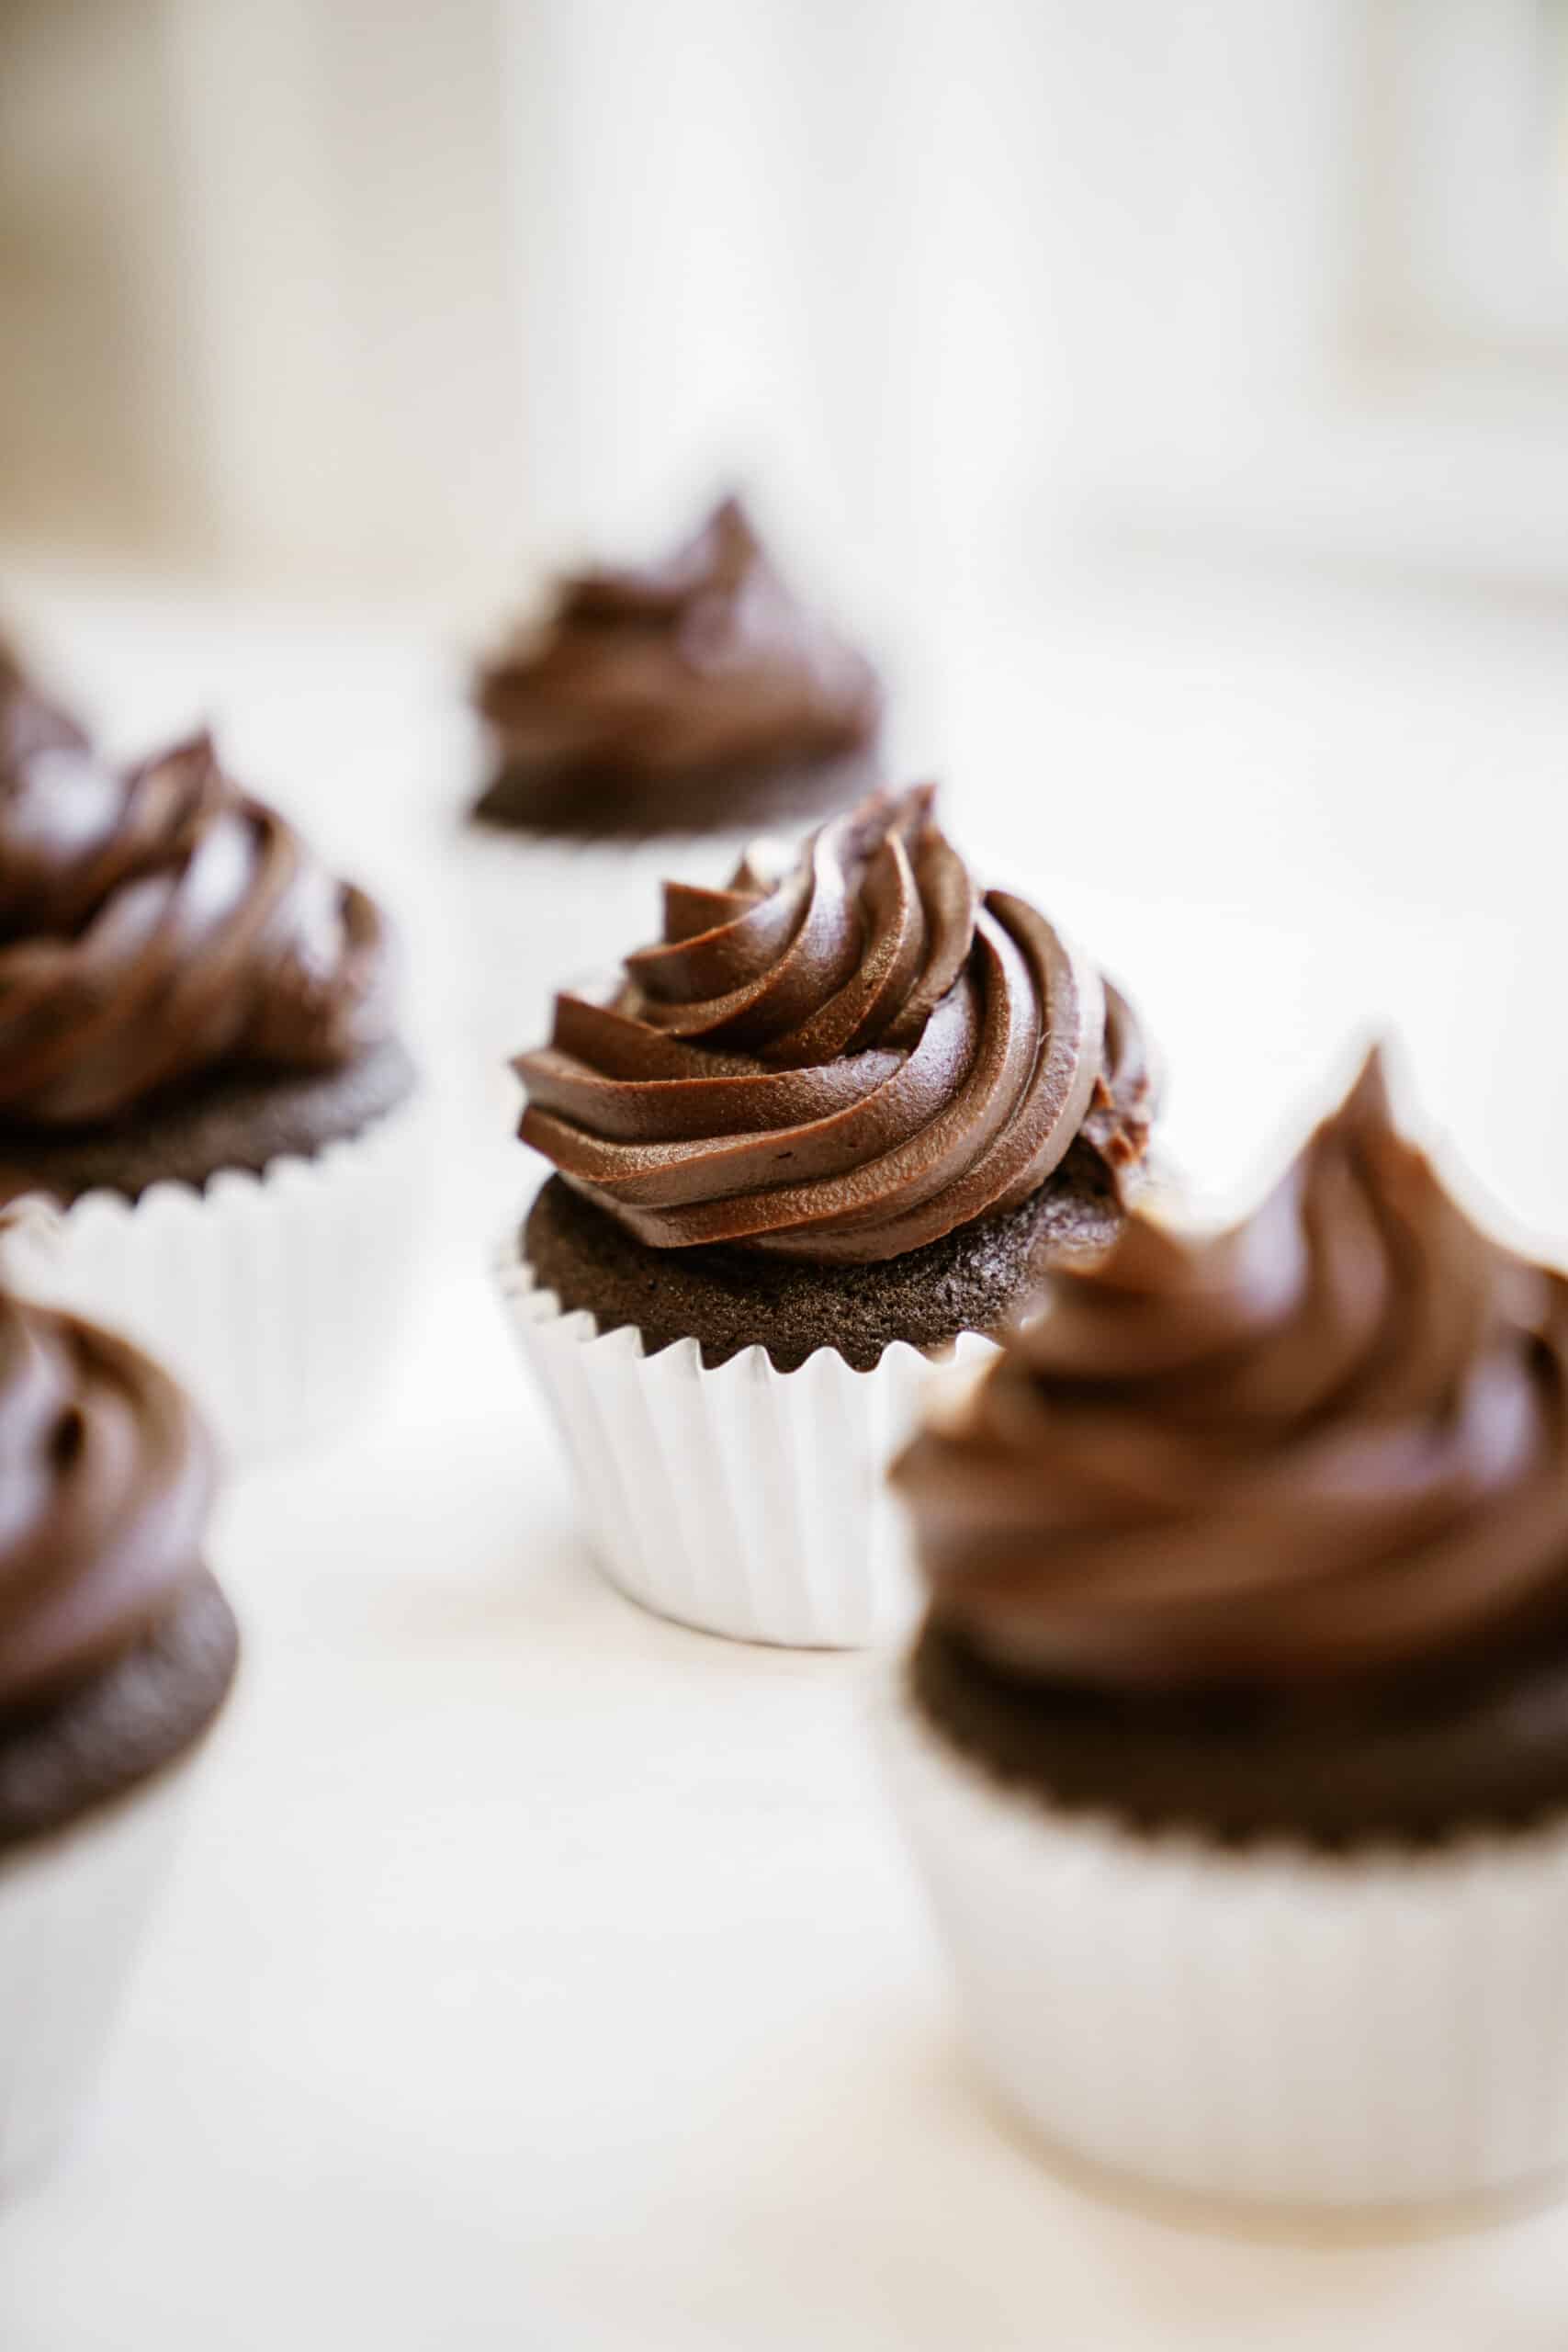 Gluten-free chocolate cupcakes on a counter